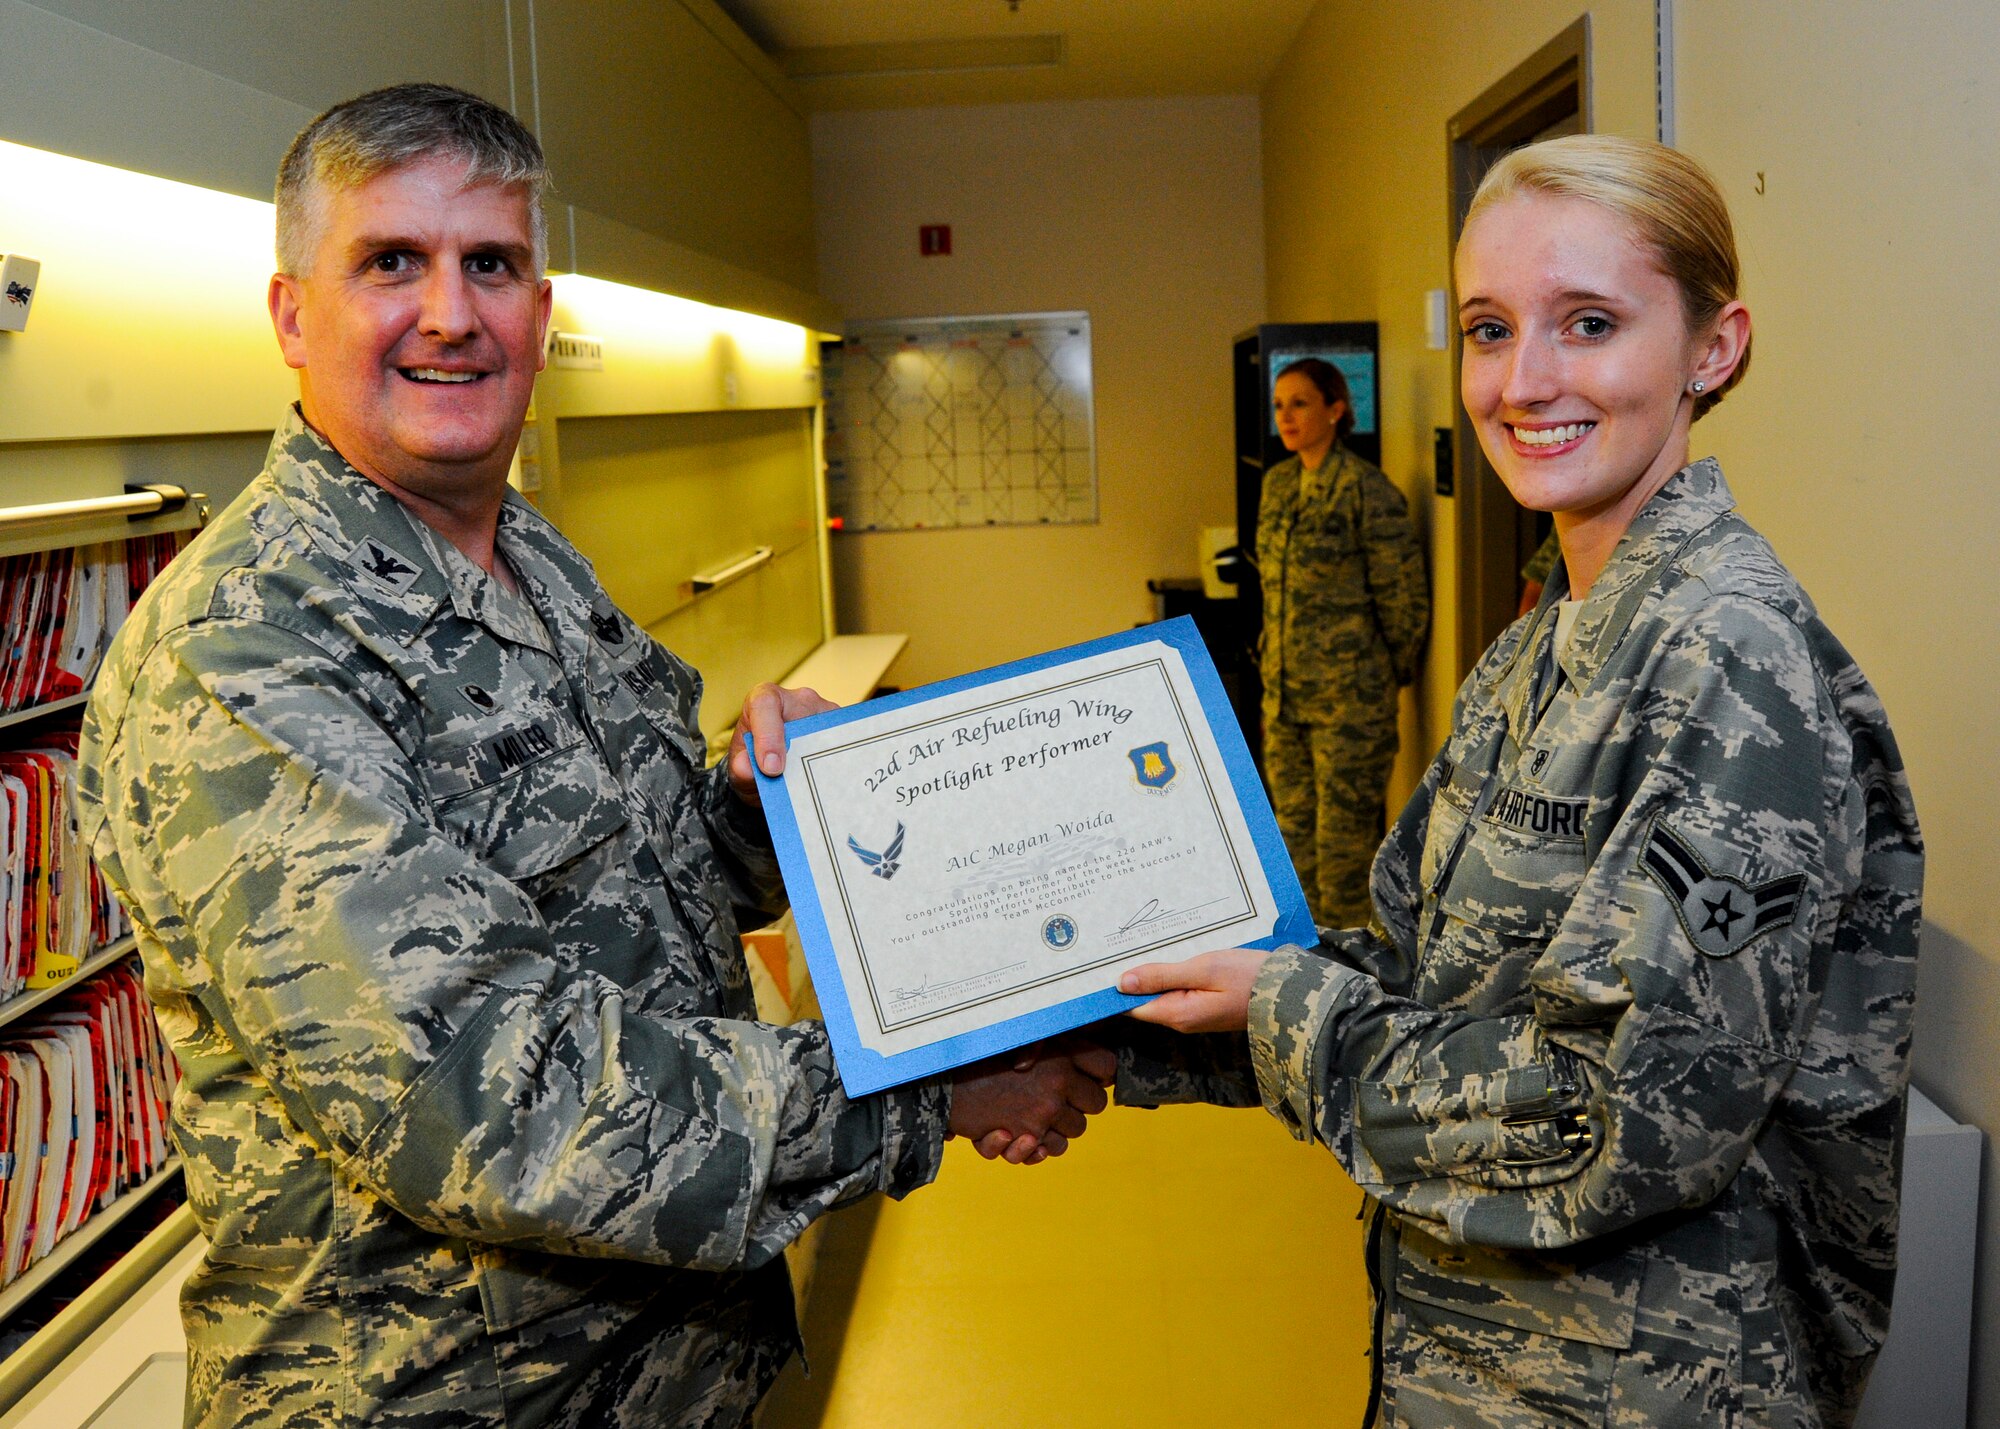 Airman 1st Class Megan Woida, 22nd Medical Support Squadron outpatient medical records technician, poses with Col. Albert Miller, 22nd Air Refueling Wing commander, Aug.18, 2015, at McConnell Air Force Base, Kan. Woida was selected as the wing spotlight performer for the week of Aug. 9 -15 for her outstanding work ethic and high patient satisfaction rate in her five months on station. (U.S. Air Force photo by Senior Airman Victor J. Caputo)